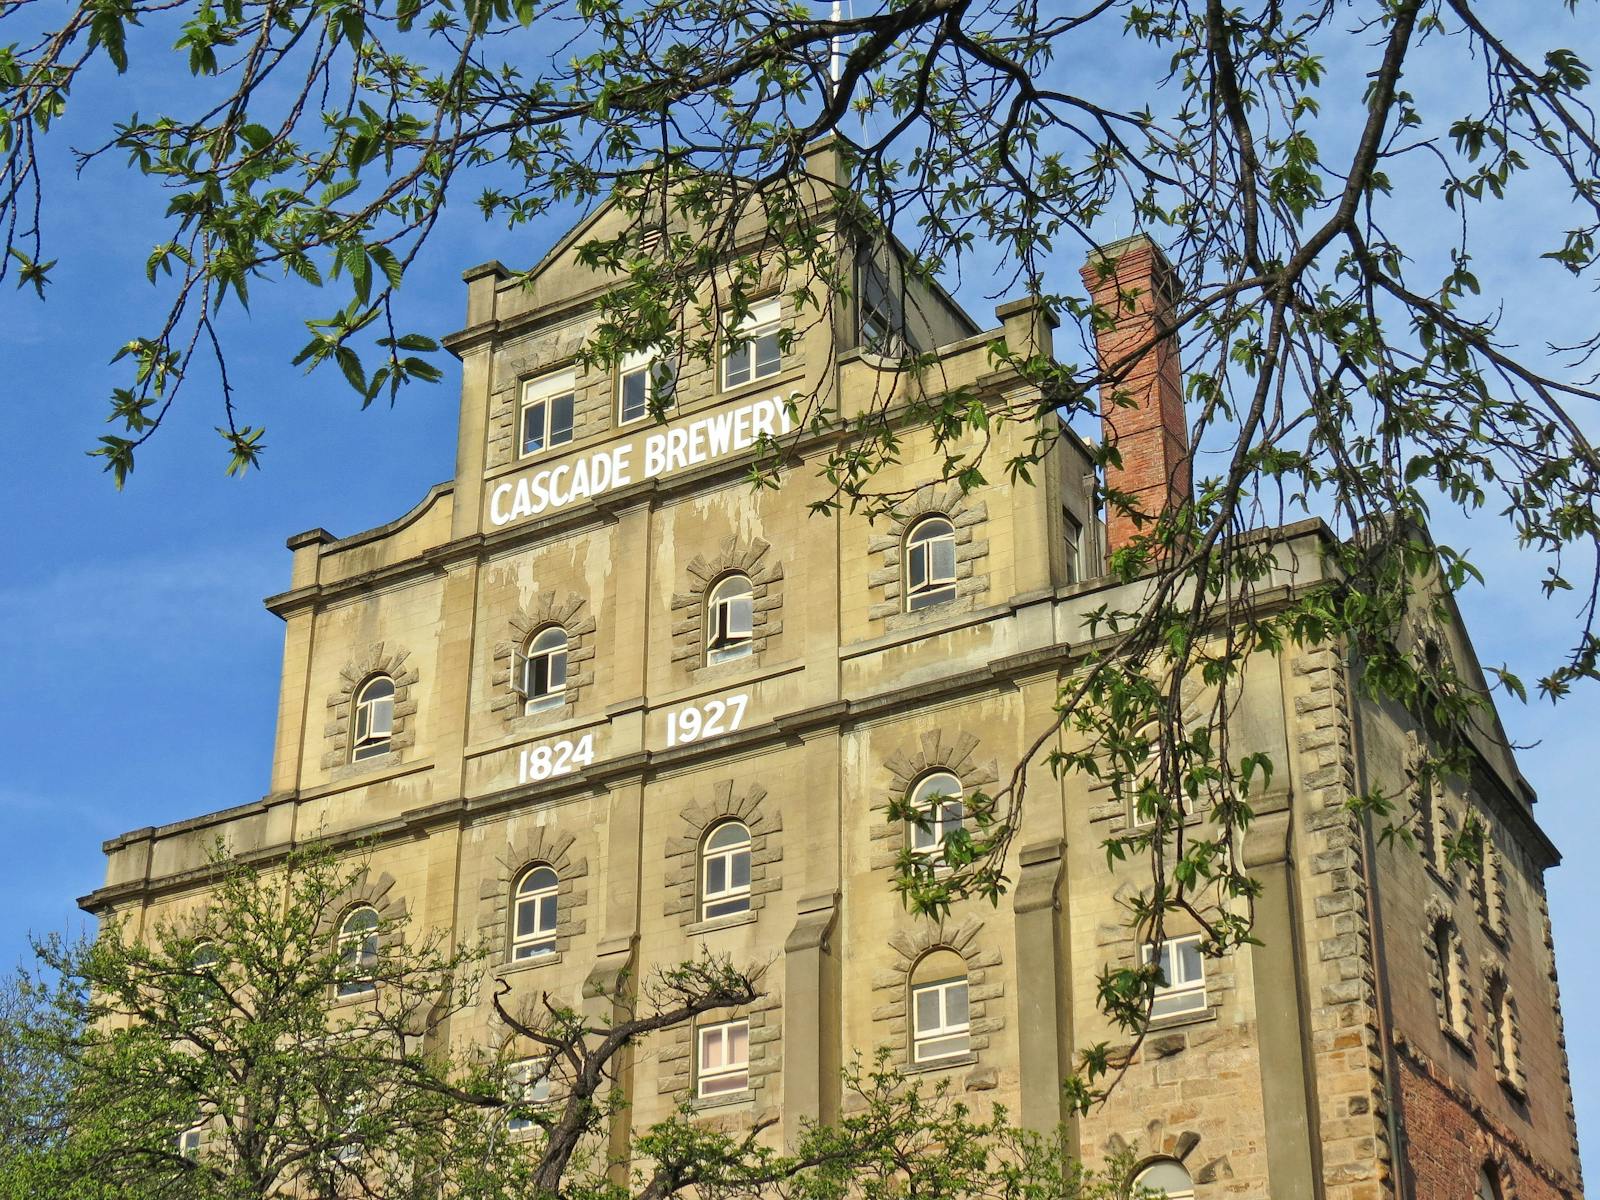 This tour takes you past the Cascade Brewery where you will see its historic sandstone facade